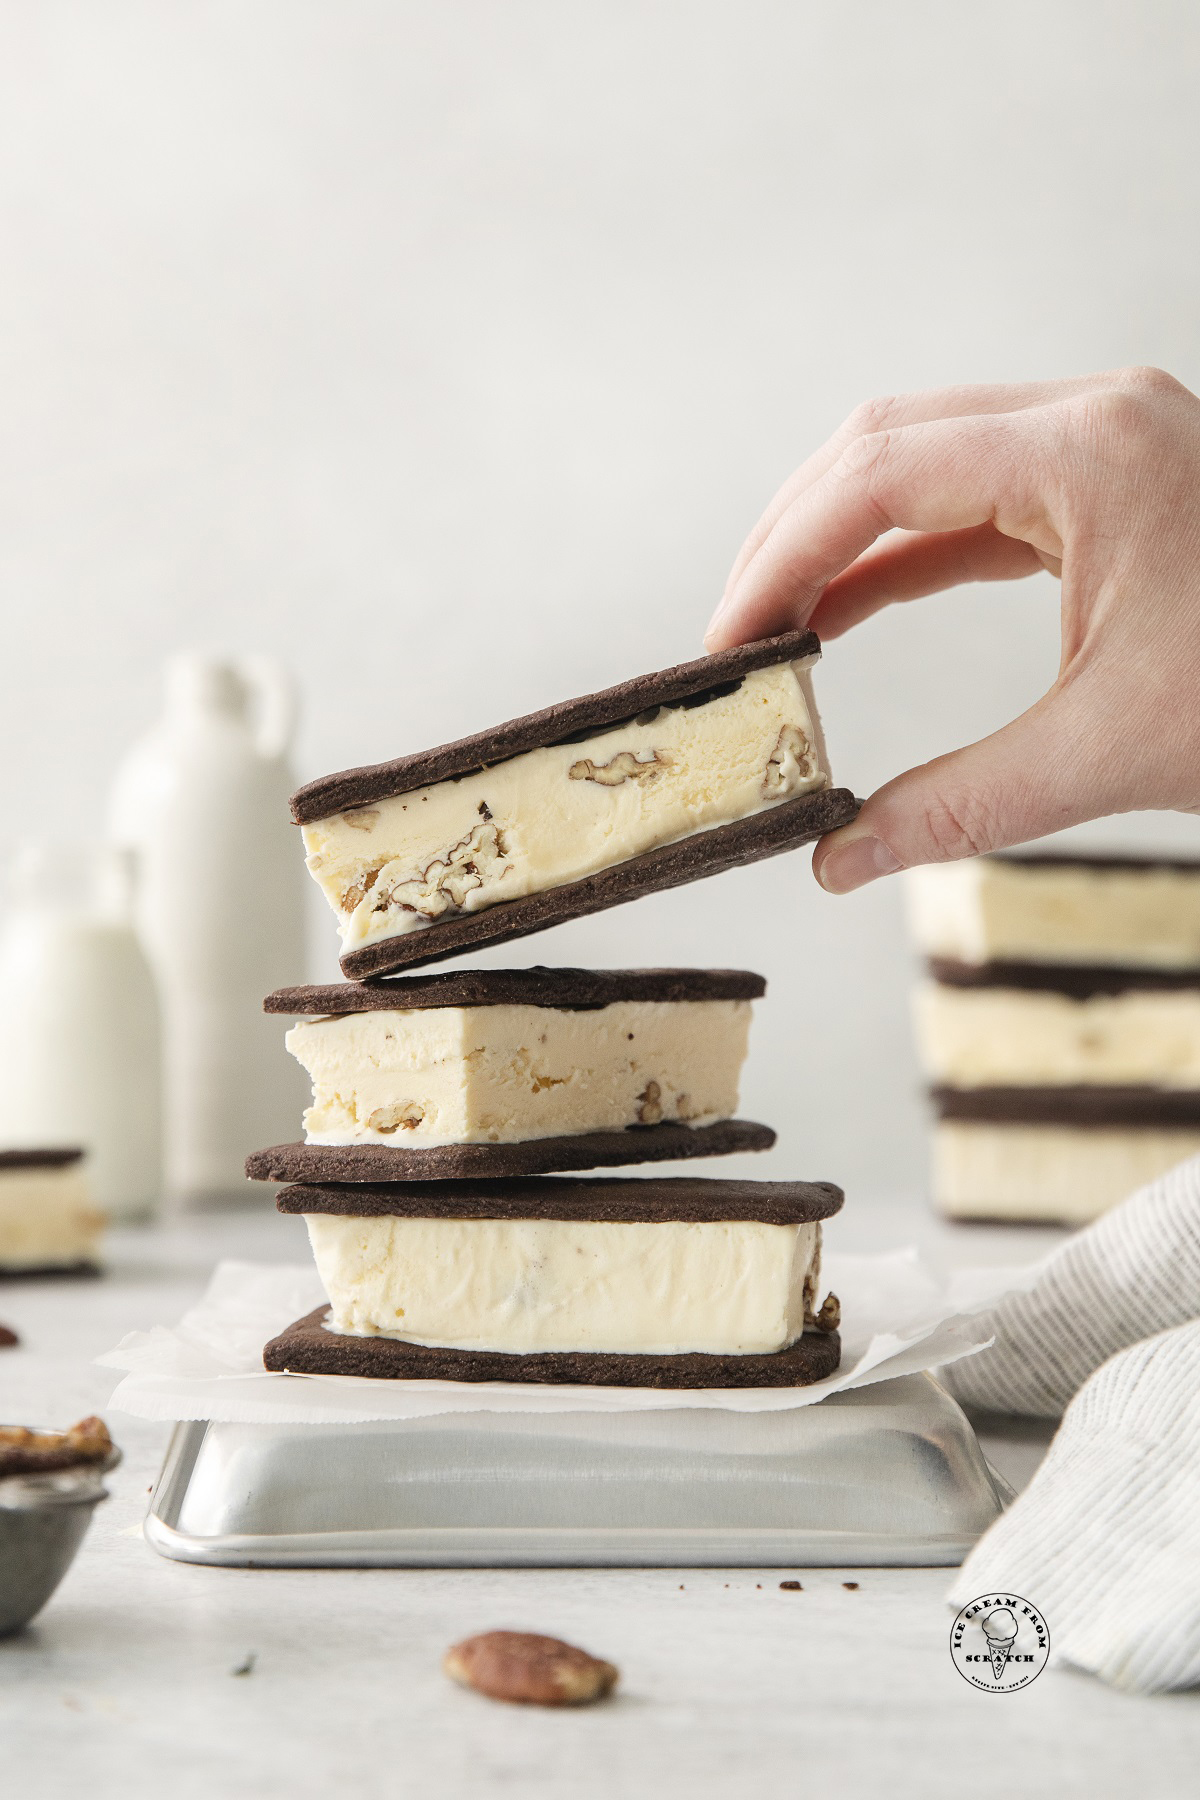 Three homemade pecan ice cream sandwiches. A hand is grabbing on from the top of the stack.